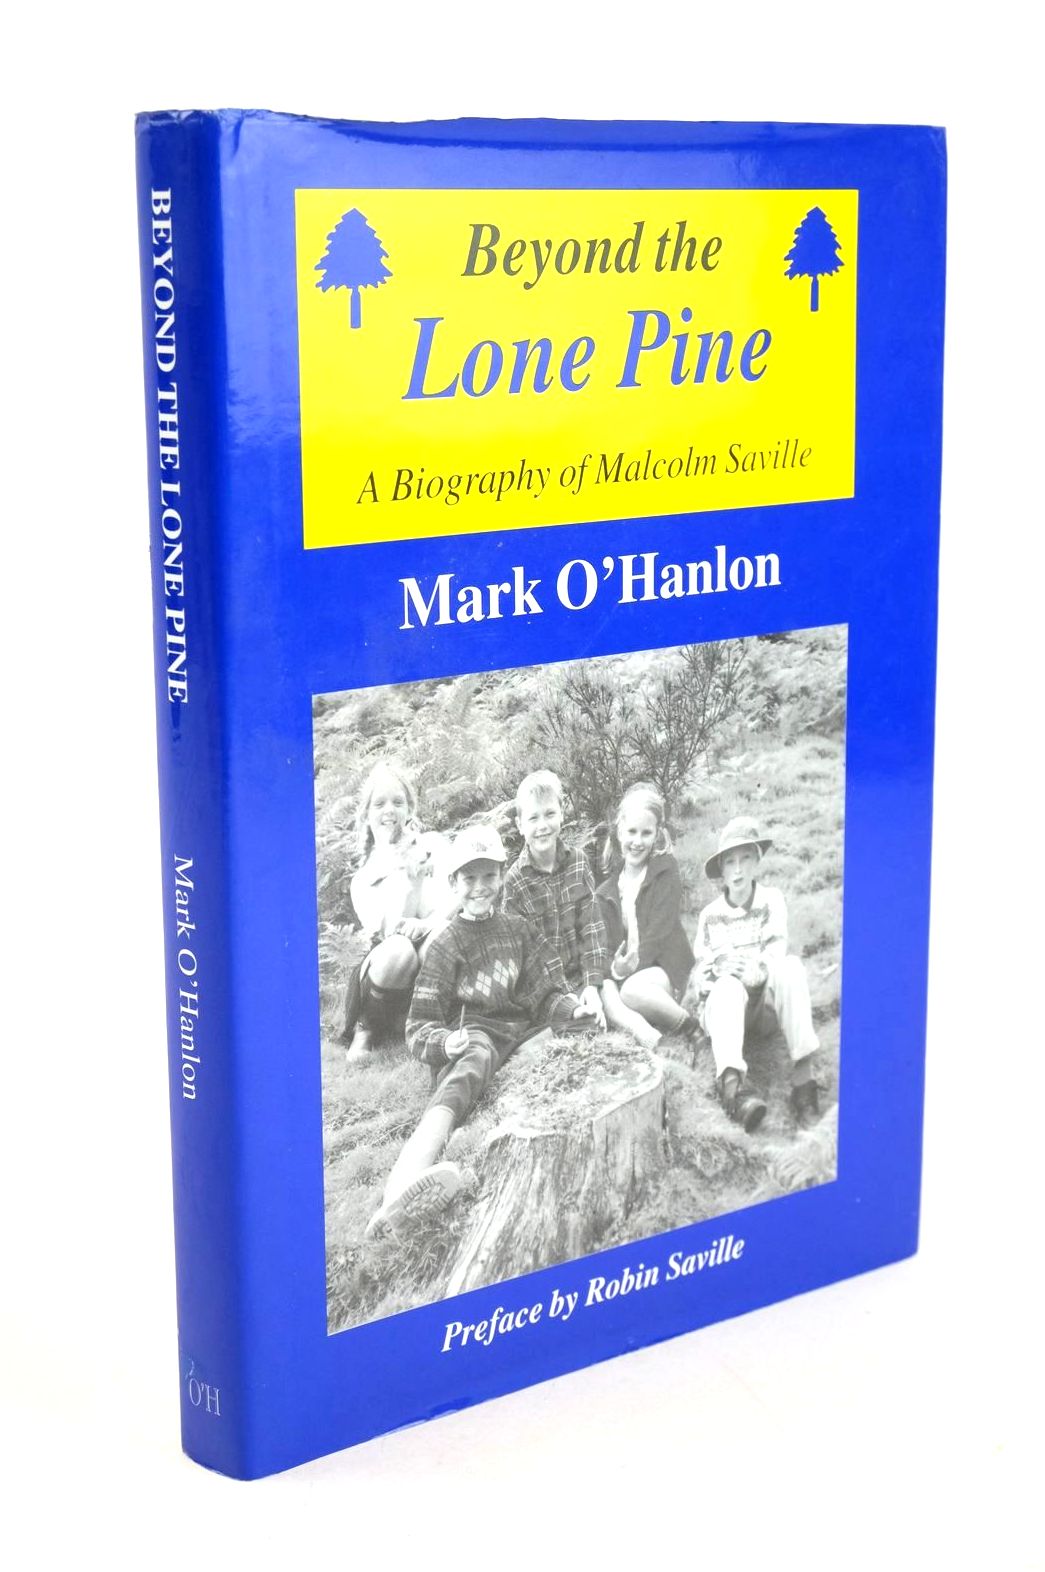 Photo of BEYOND THE LONE PINE written by O'Hanlon, Mark published by Mark O'Hanlon (STOCK CODE: 1327459)  for sale by Stella & Rose's Books